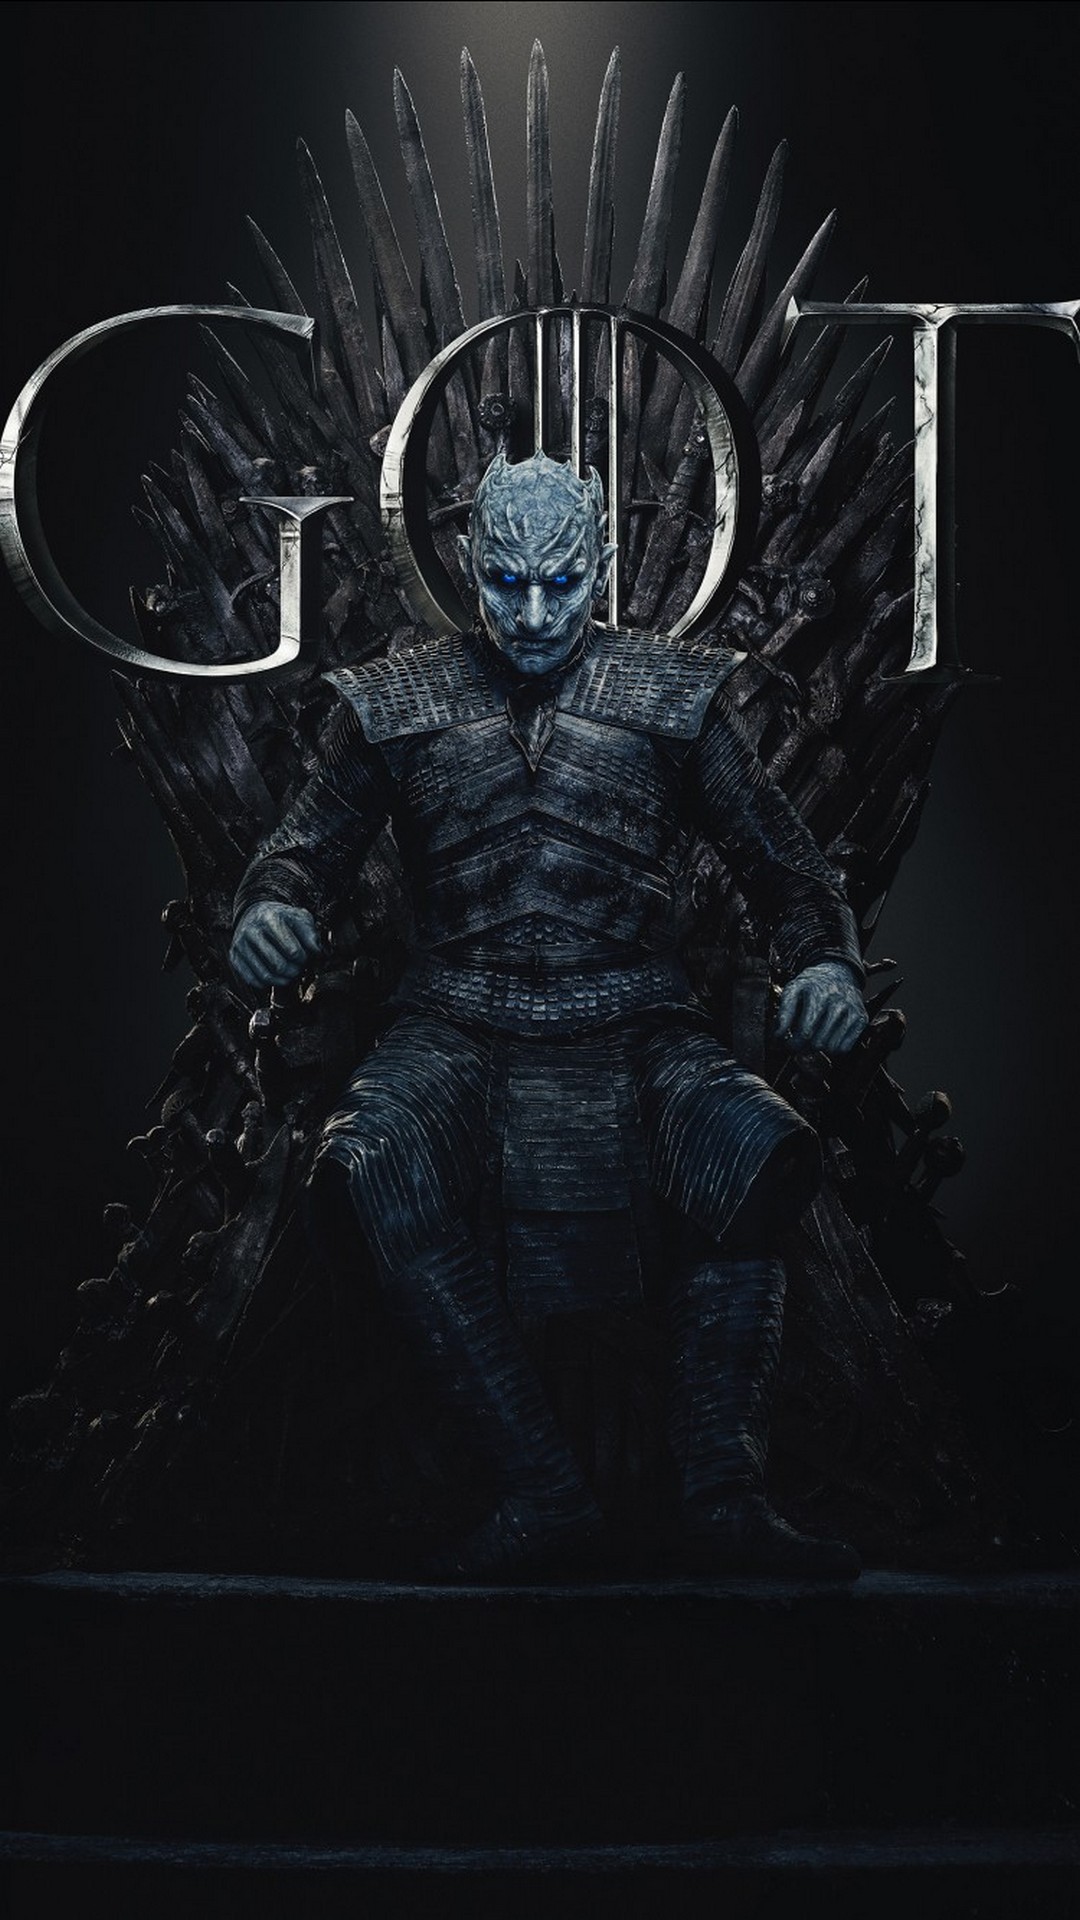 Game of Thrones 8 Season iPhone Wallpaper with high-resolution 1080x1920 pixel. You can use this poster wallpaper for your Desktop Computers, Mac Screensavers, Windows Backgrounds, iPhone Wallpapers, Tablet or Android Lock screen and another Mobile device